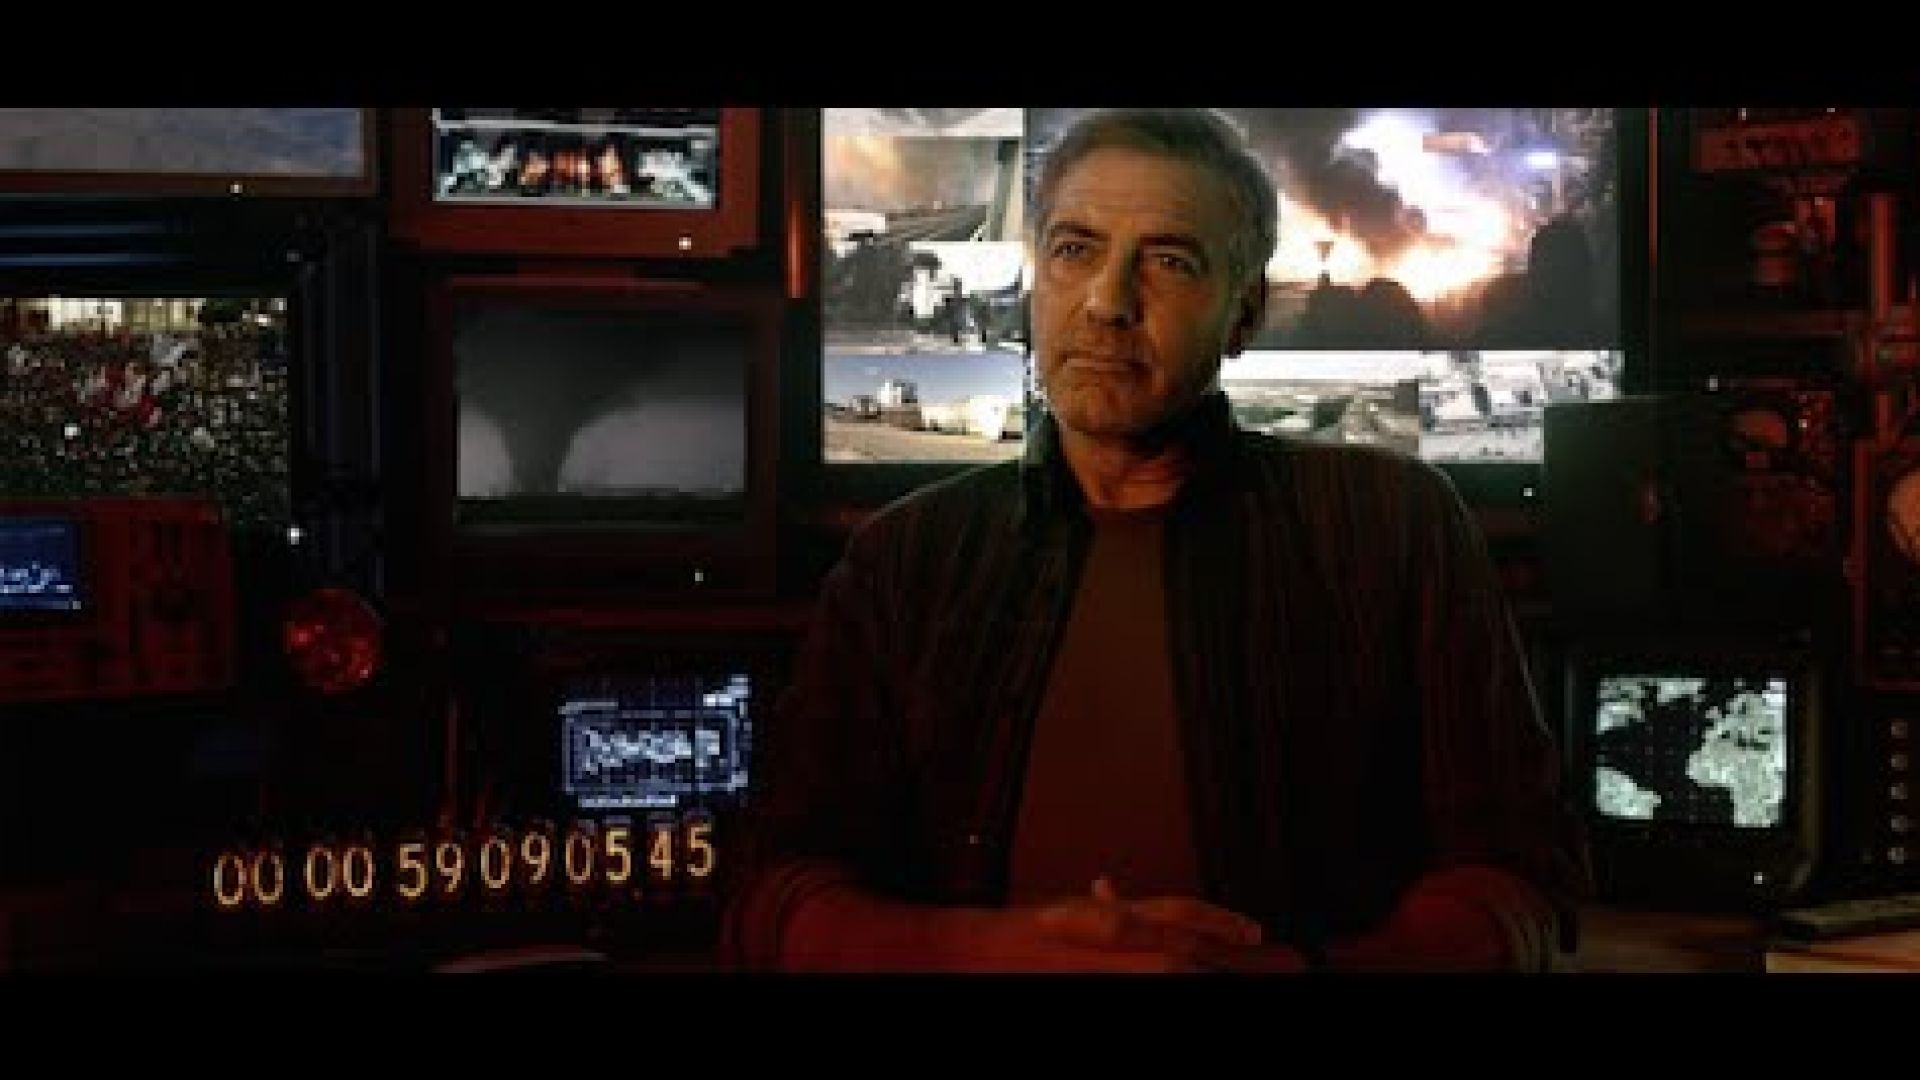 Clues Surround You in New TV Spot for Disney&#039;s &#039;Tomorrowland